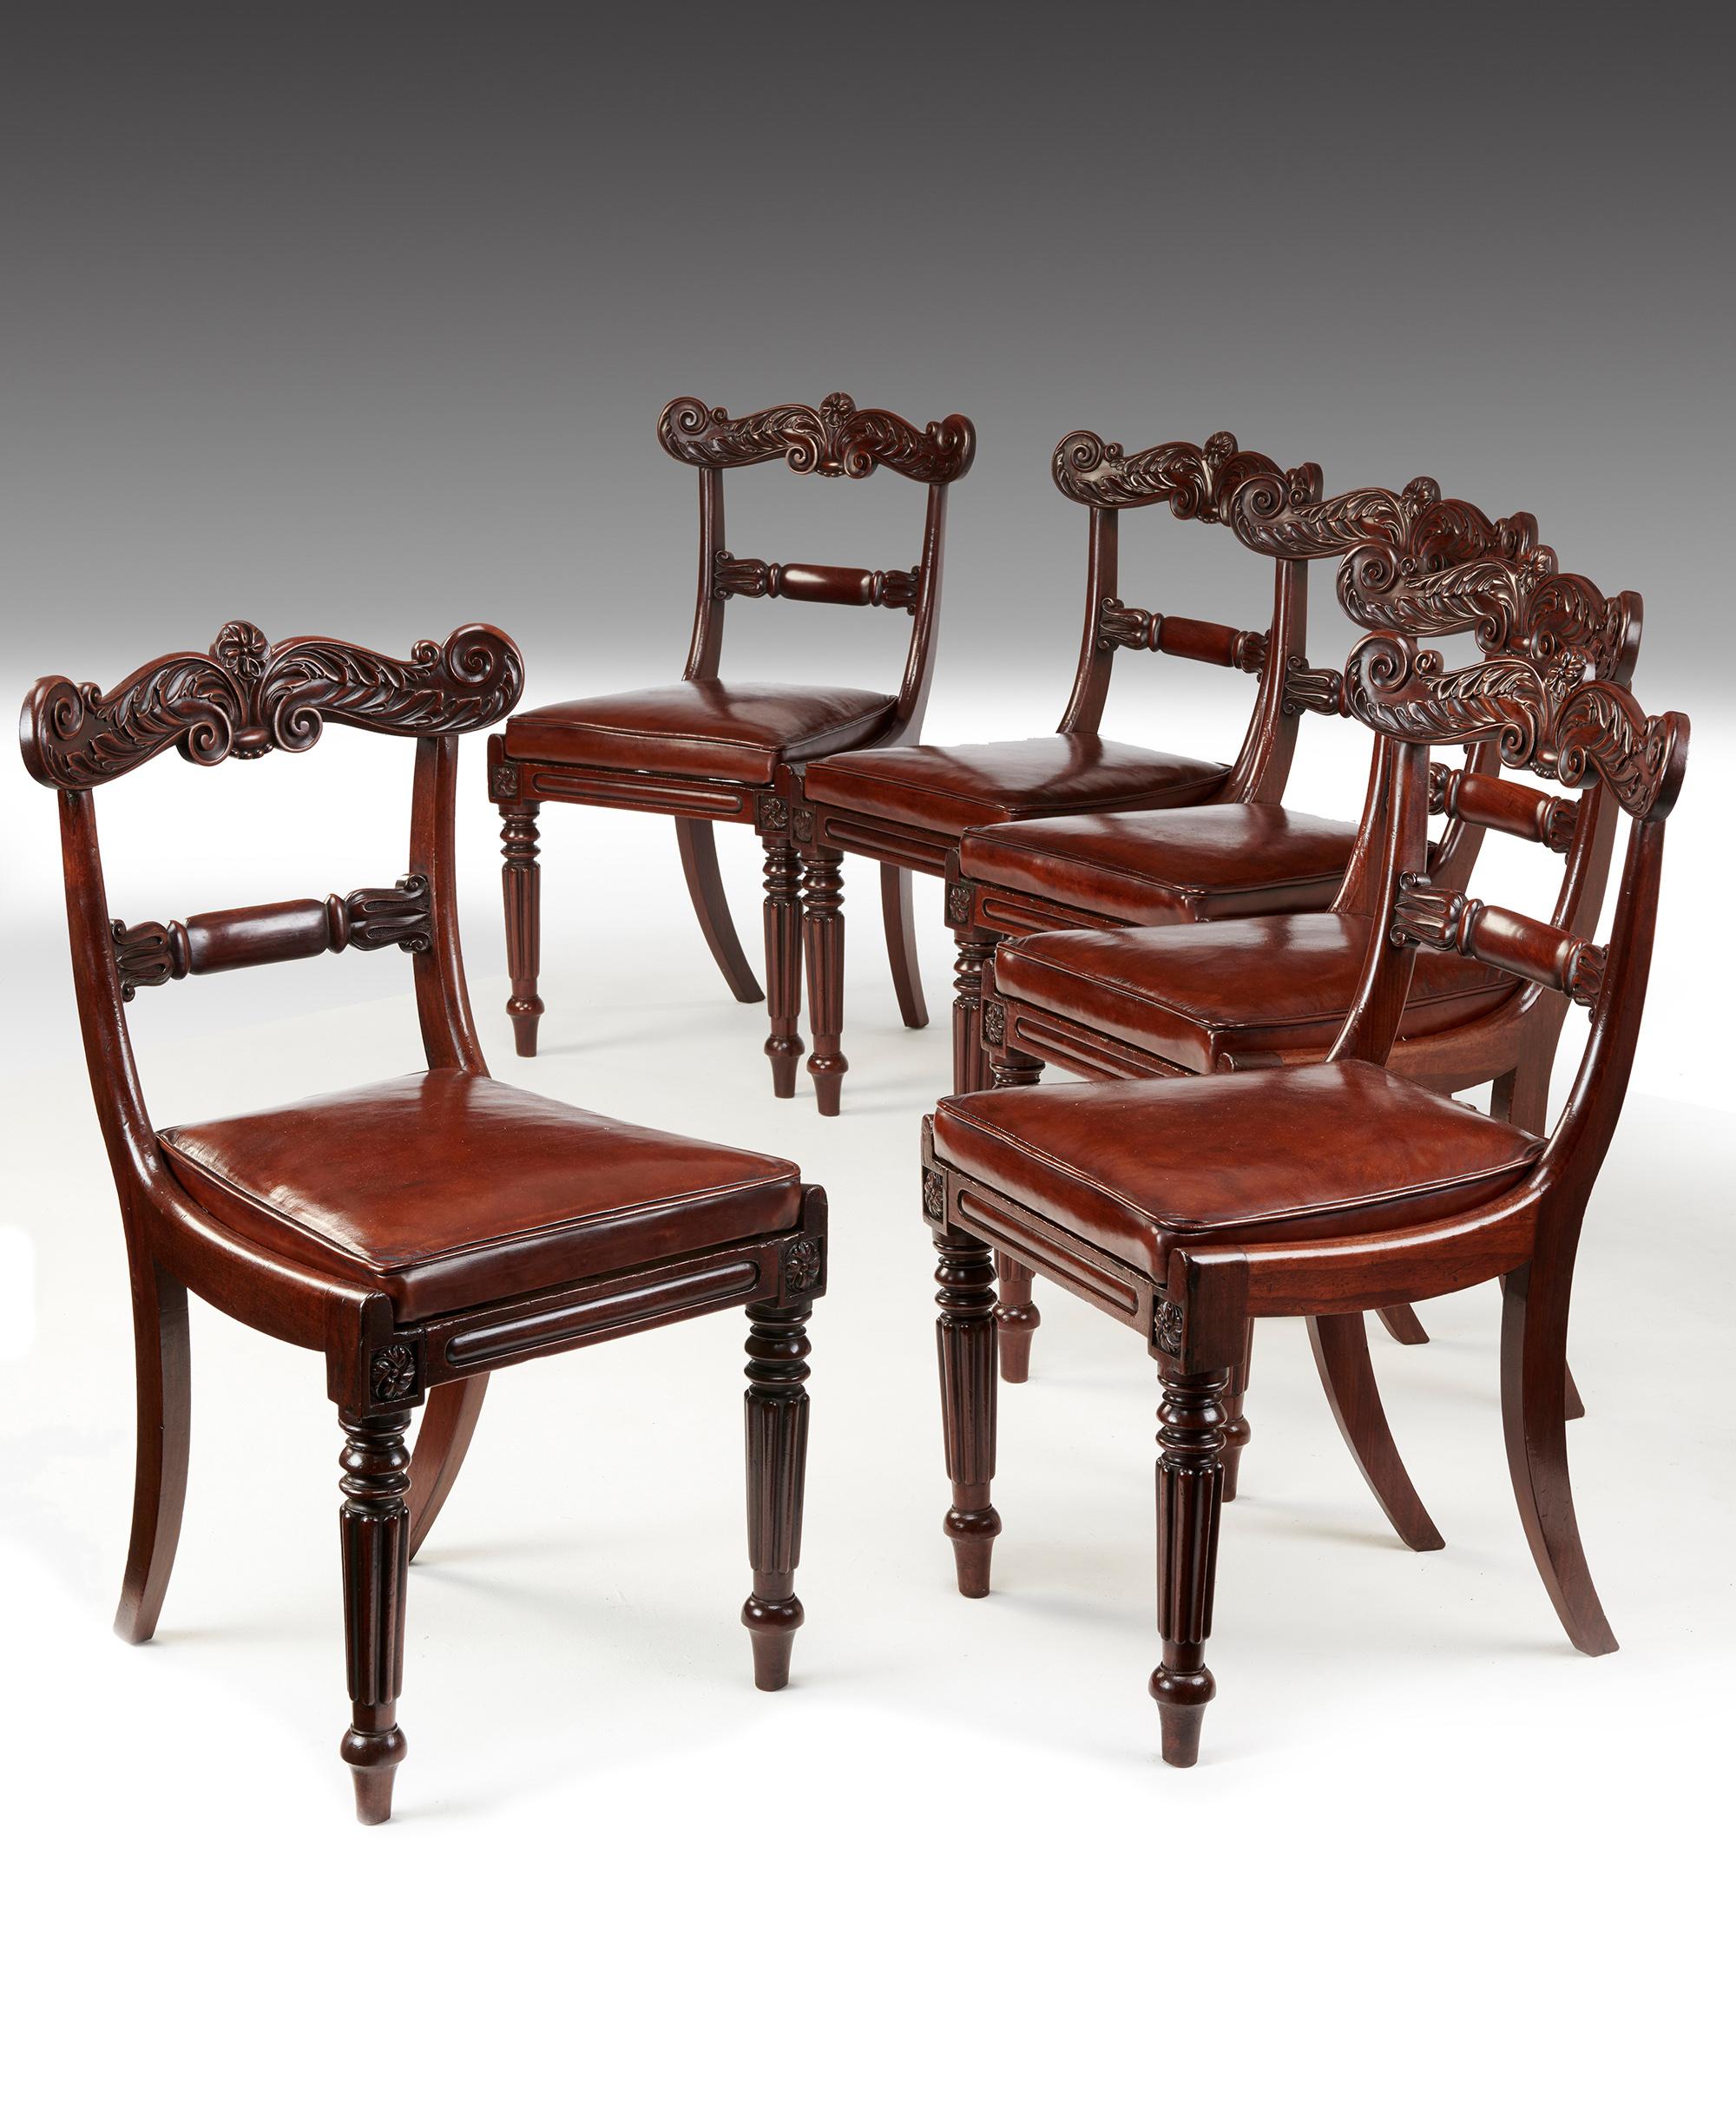 A fine set of six William IV mahogany dining chairs with leather drop in squab seats.

English, circa 1830.

Overall of elegant design and constructed from a fine choice of mahogany, the scrolled top rail finely carved with acanthus leaf design